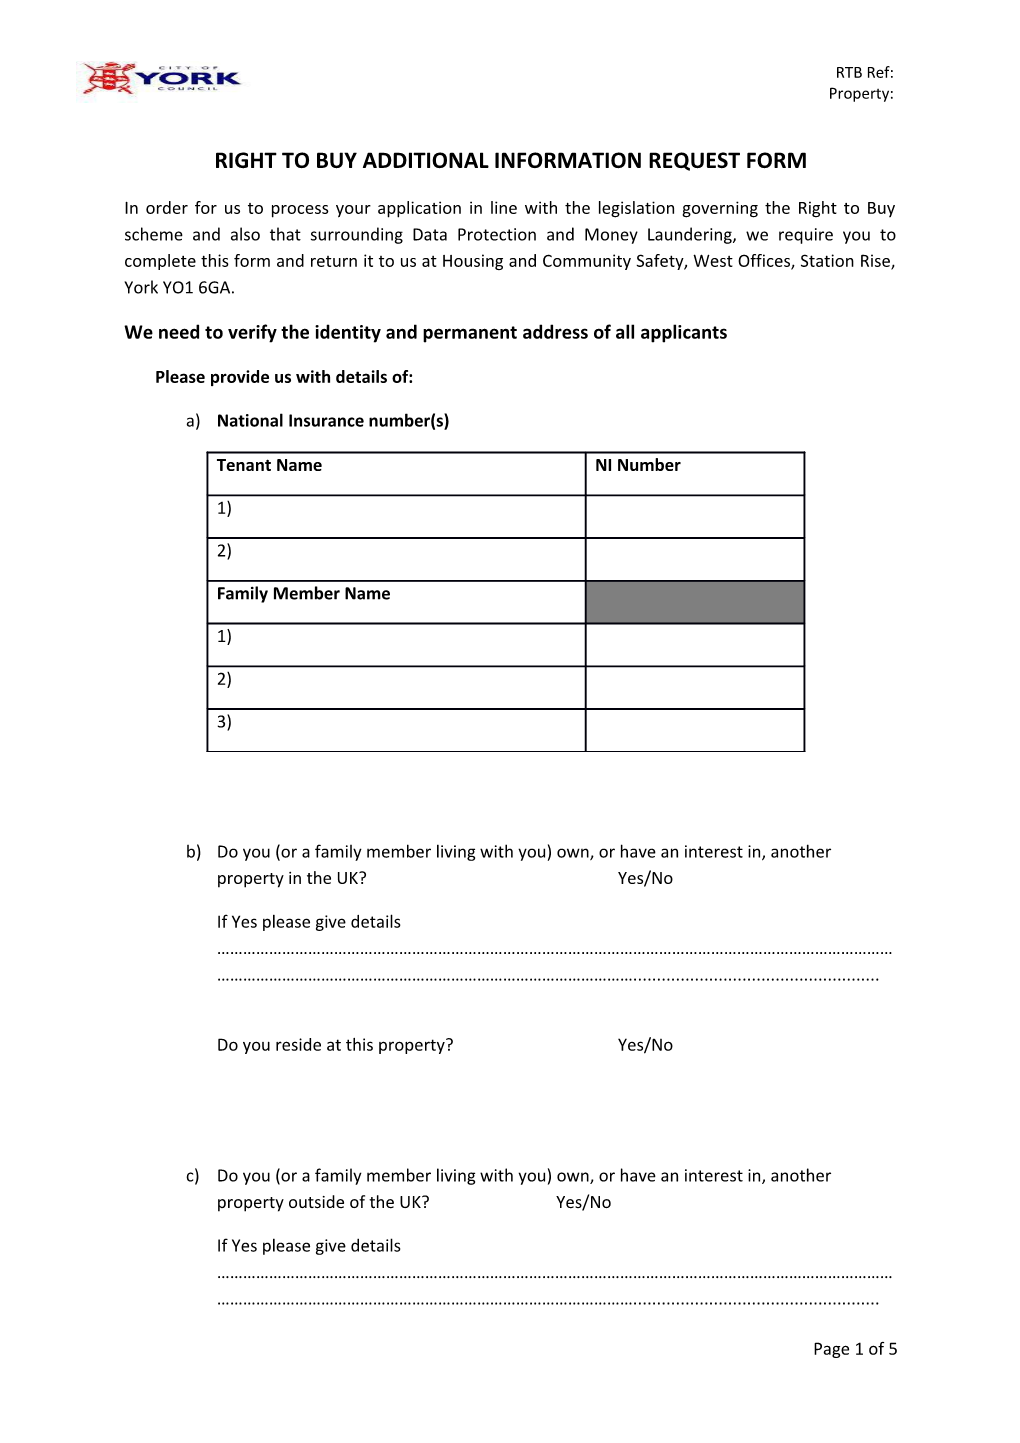 Right to Buy Additional Information Request Form